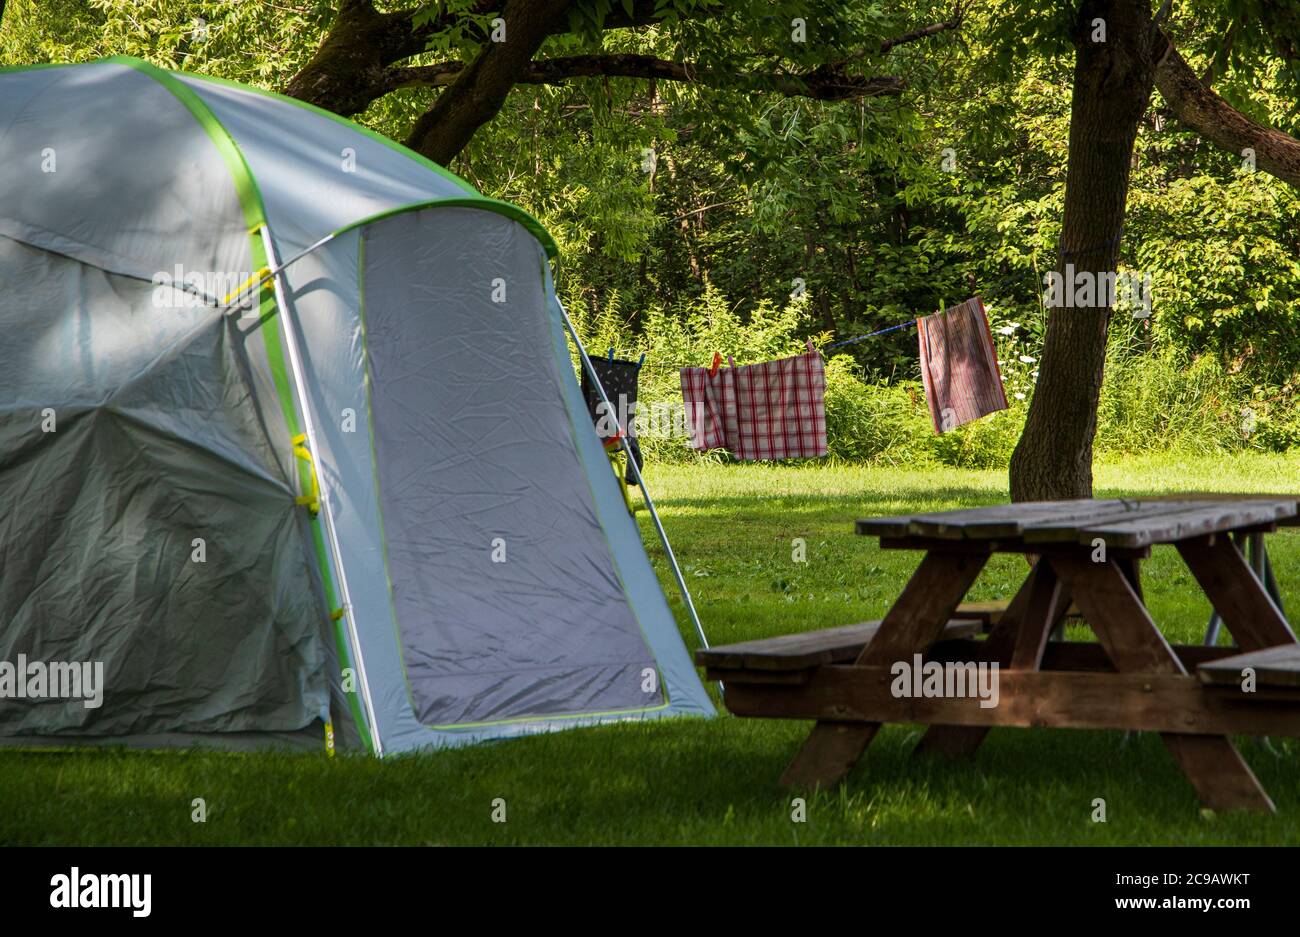 A camping tent in front laundry drying between trees on a campsite by a sunny summer day Stock Photo